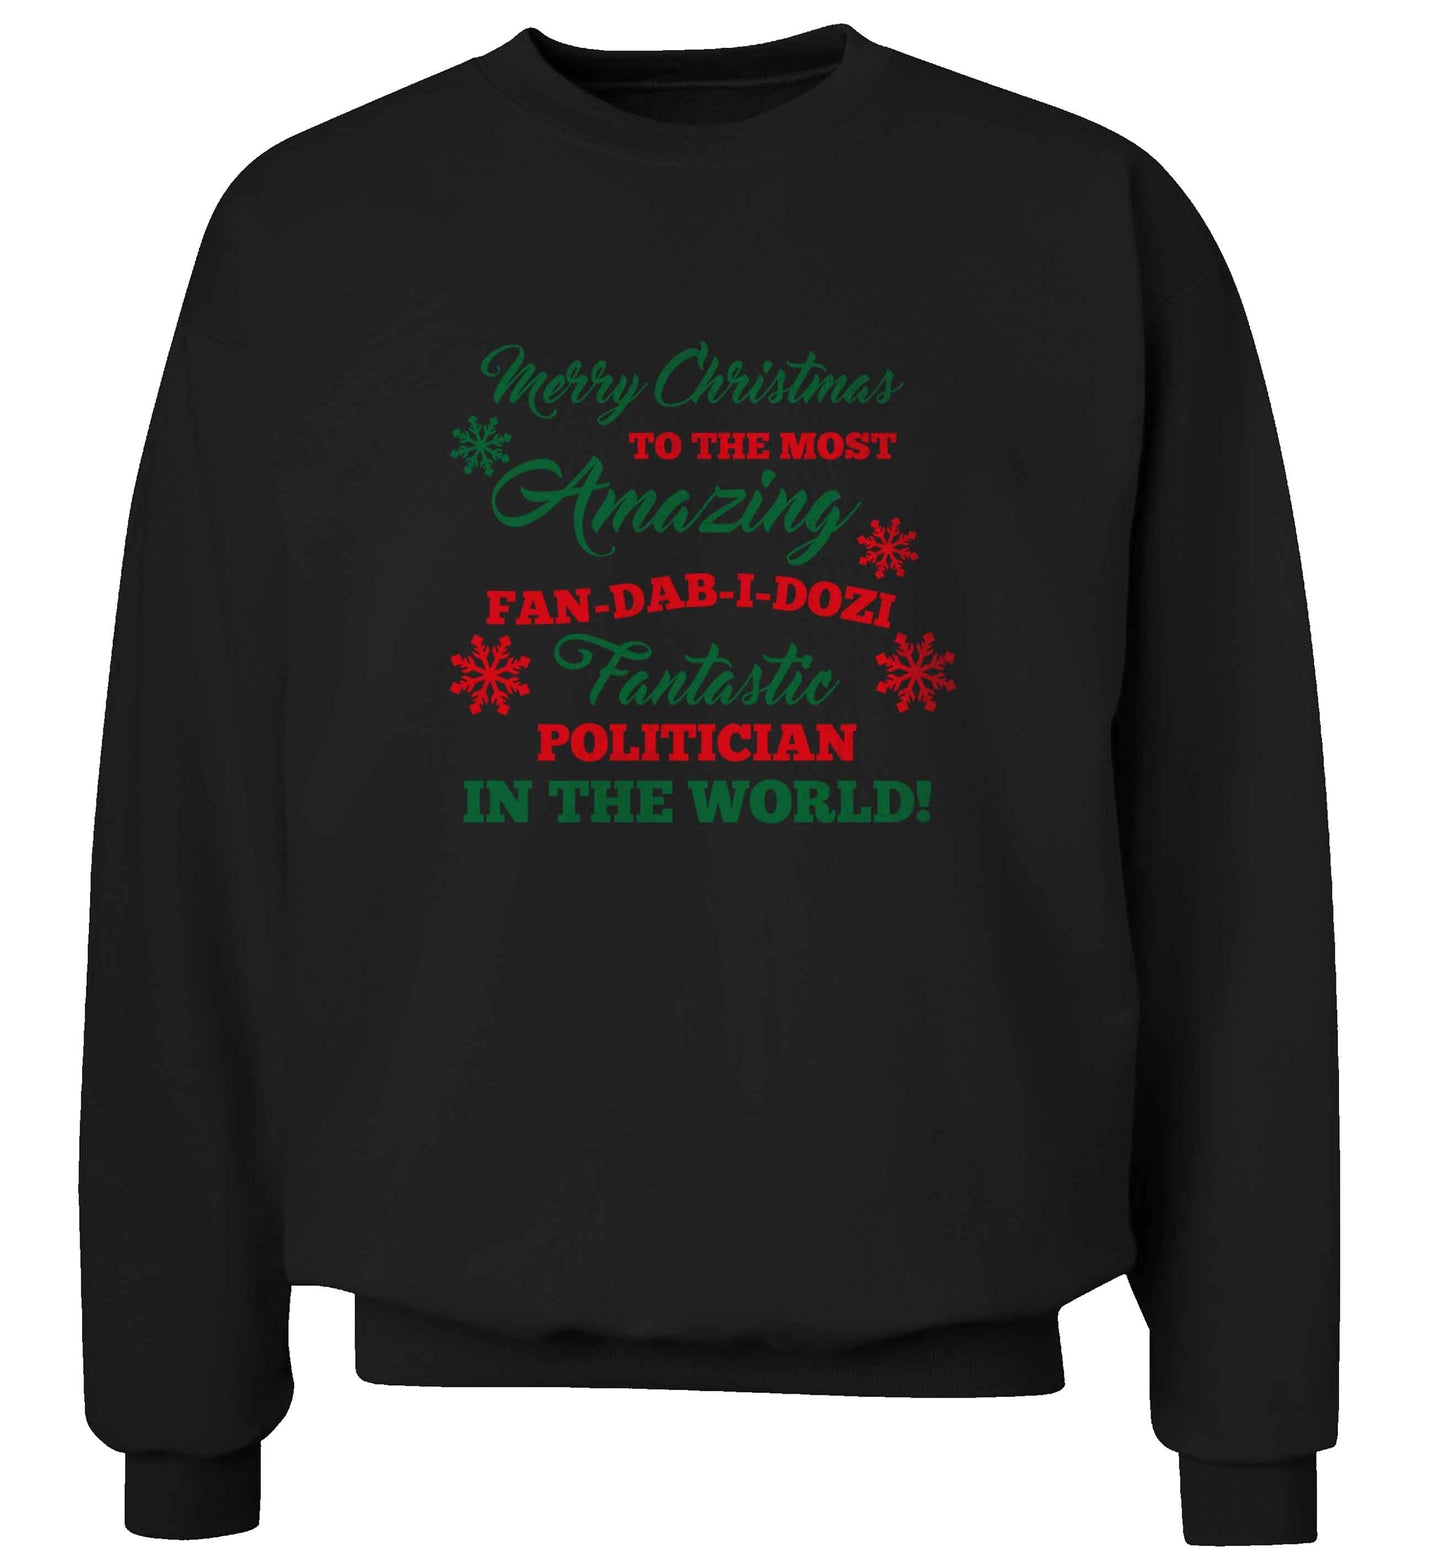 Merry Christmas to the most amazing politician in the world! adult's unisex black sweater 2XL